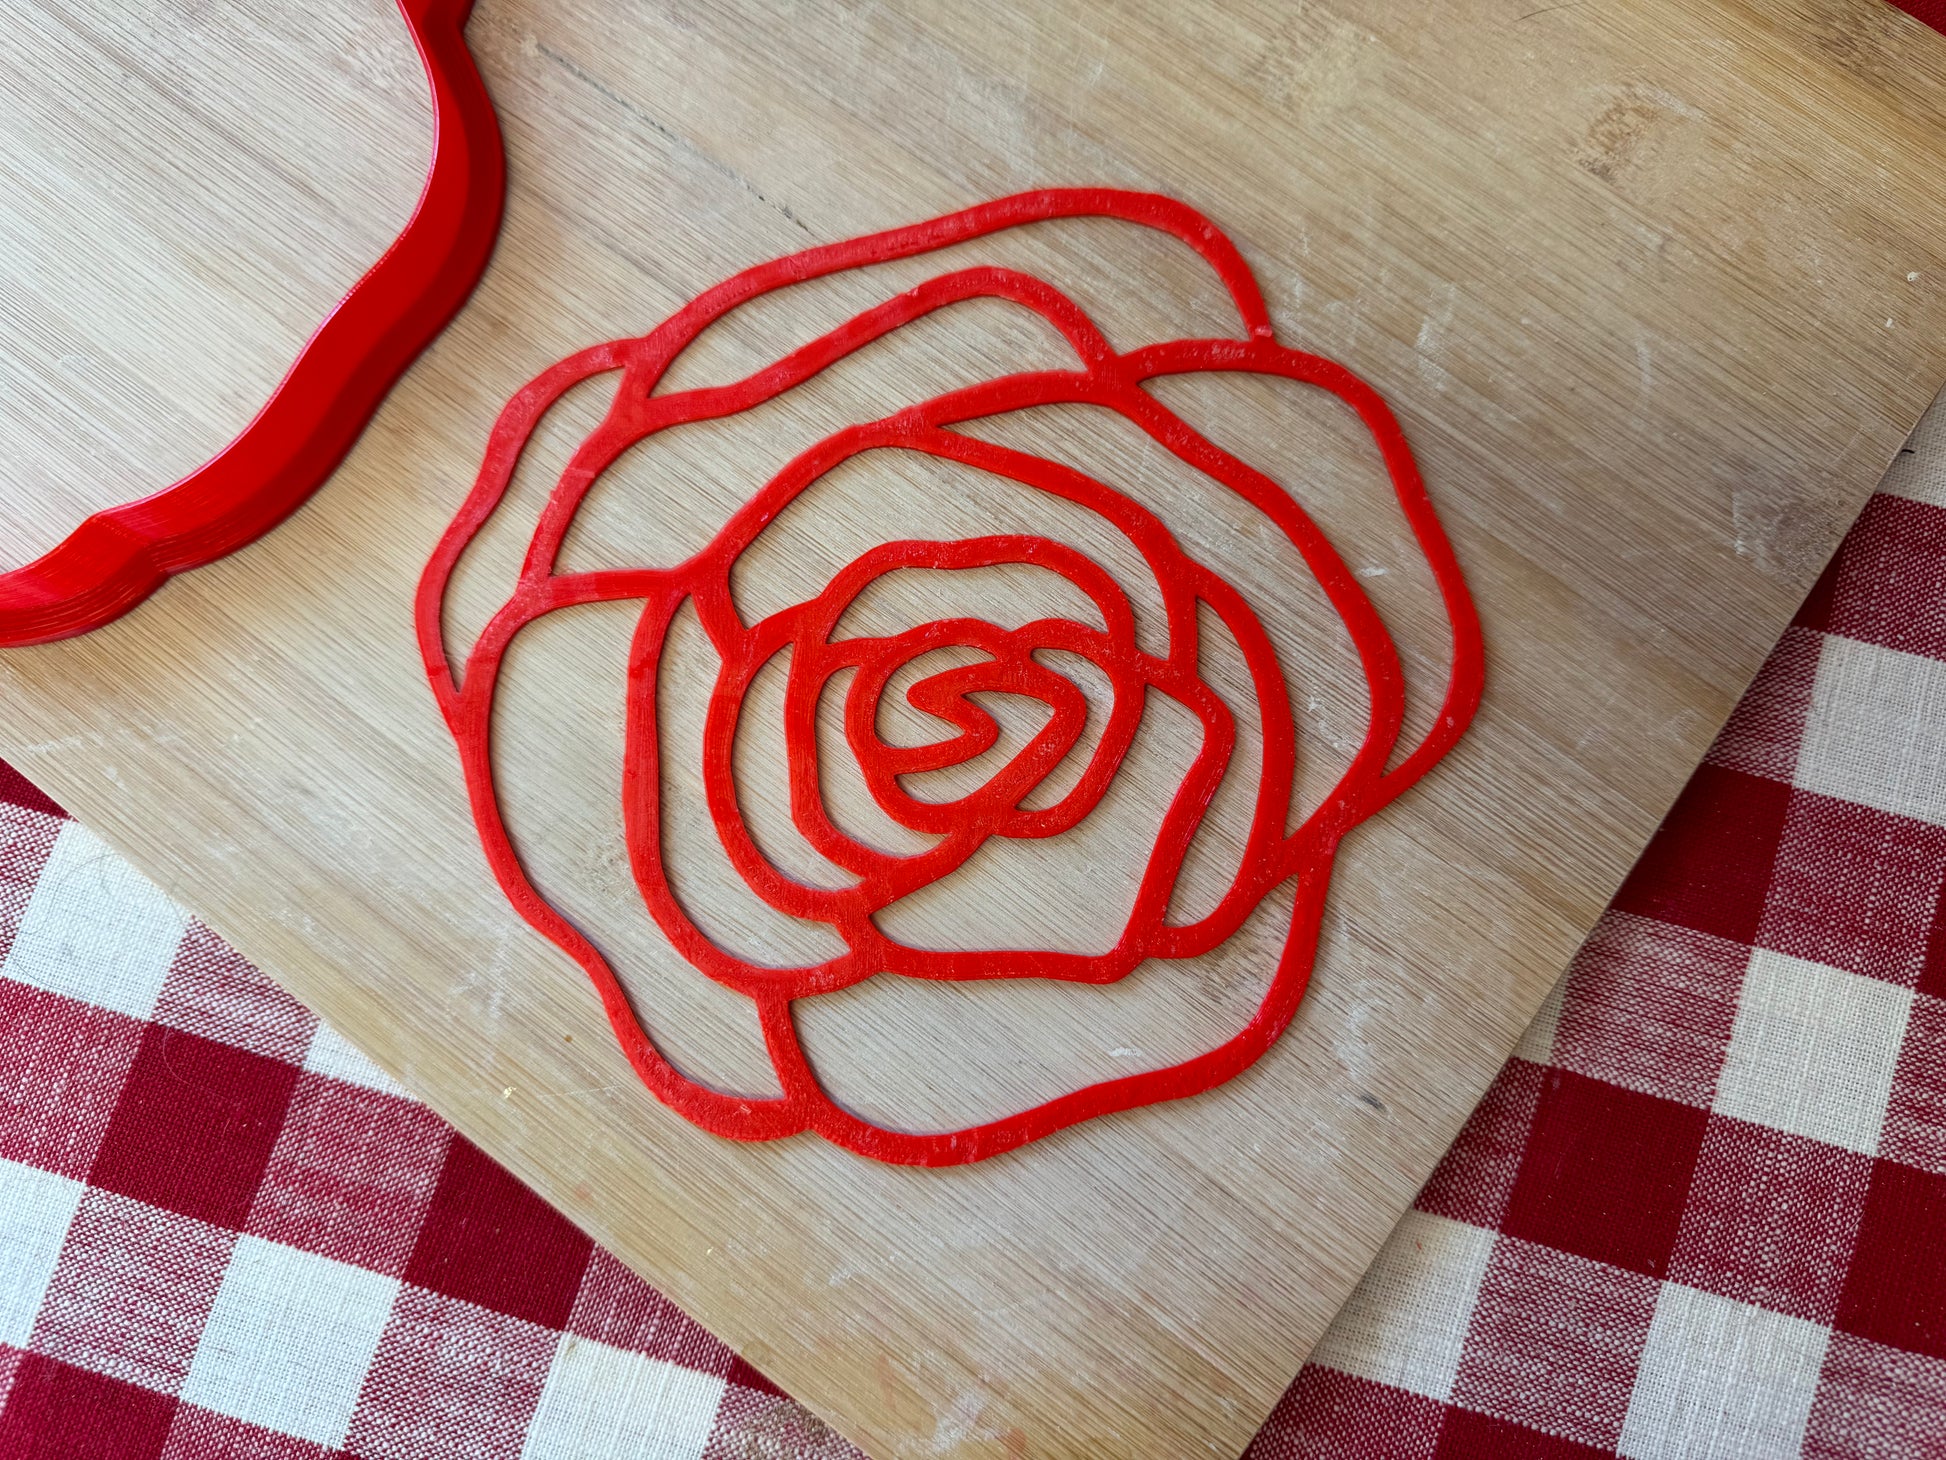 Pottery Stamp / Clay Texture Tool - Rose S40